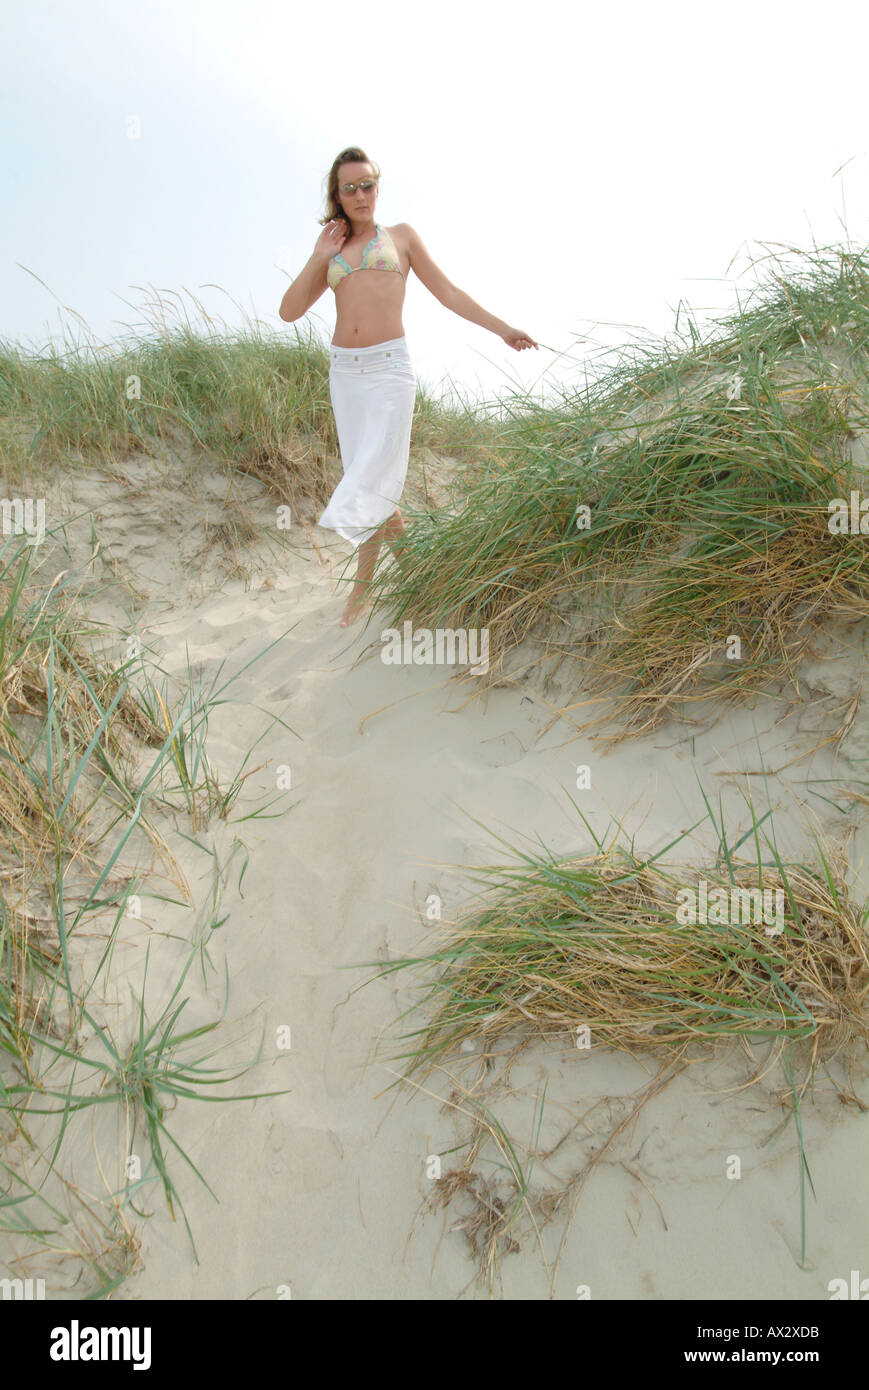 young girl coast grass sands beach sky hot Sommer Sonne Strand Stock Photo